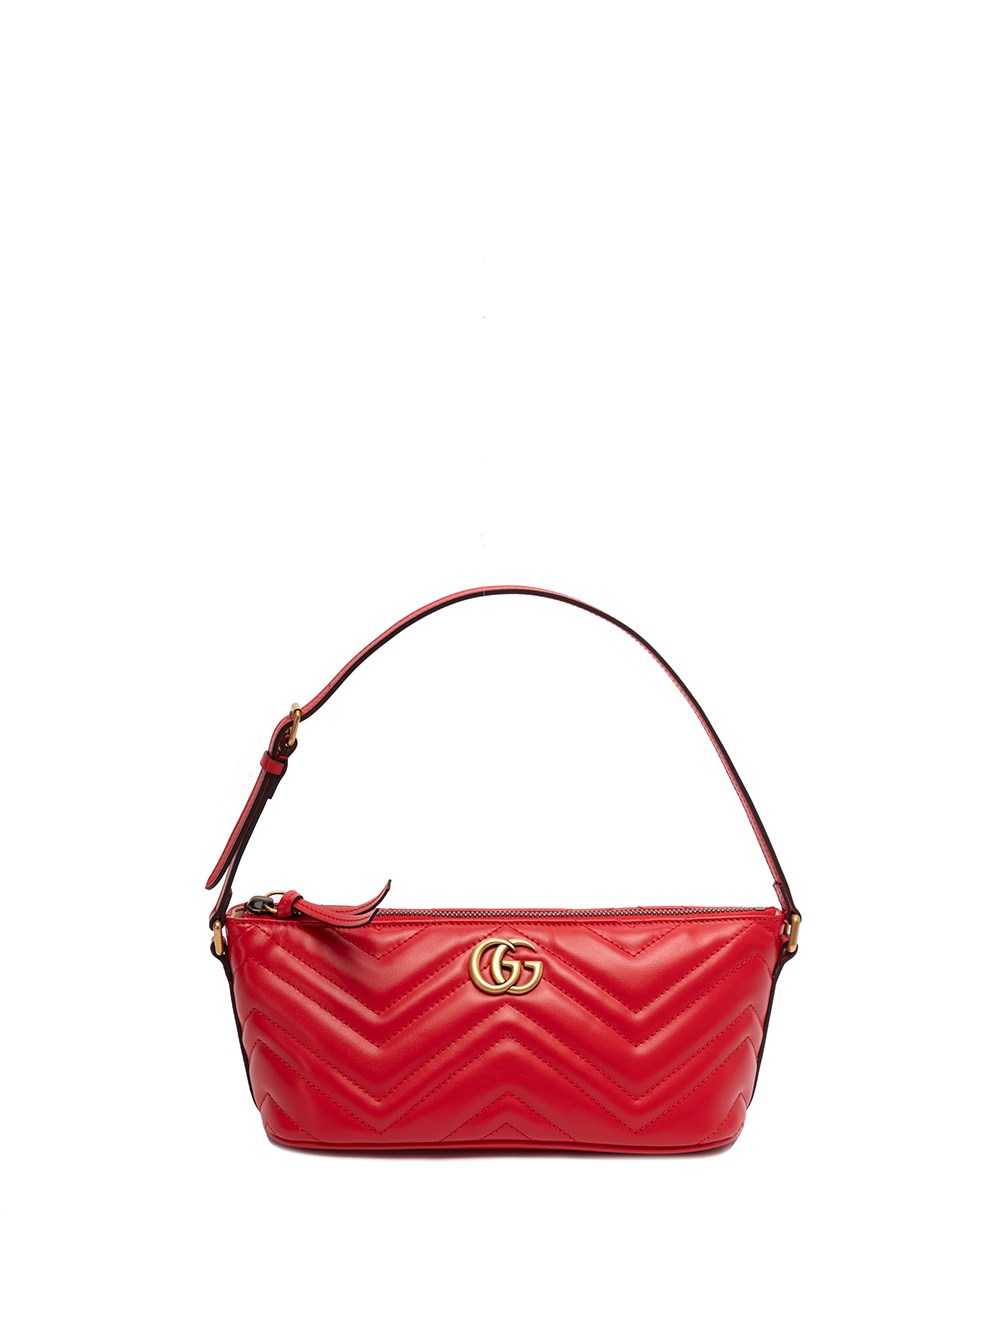 Comparing the Different Sizes of the Gucci GG Marmont Matelasse Shoulder  Bag